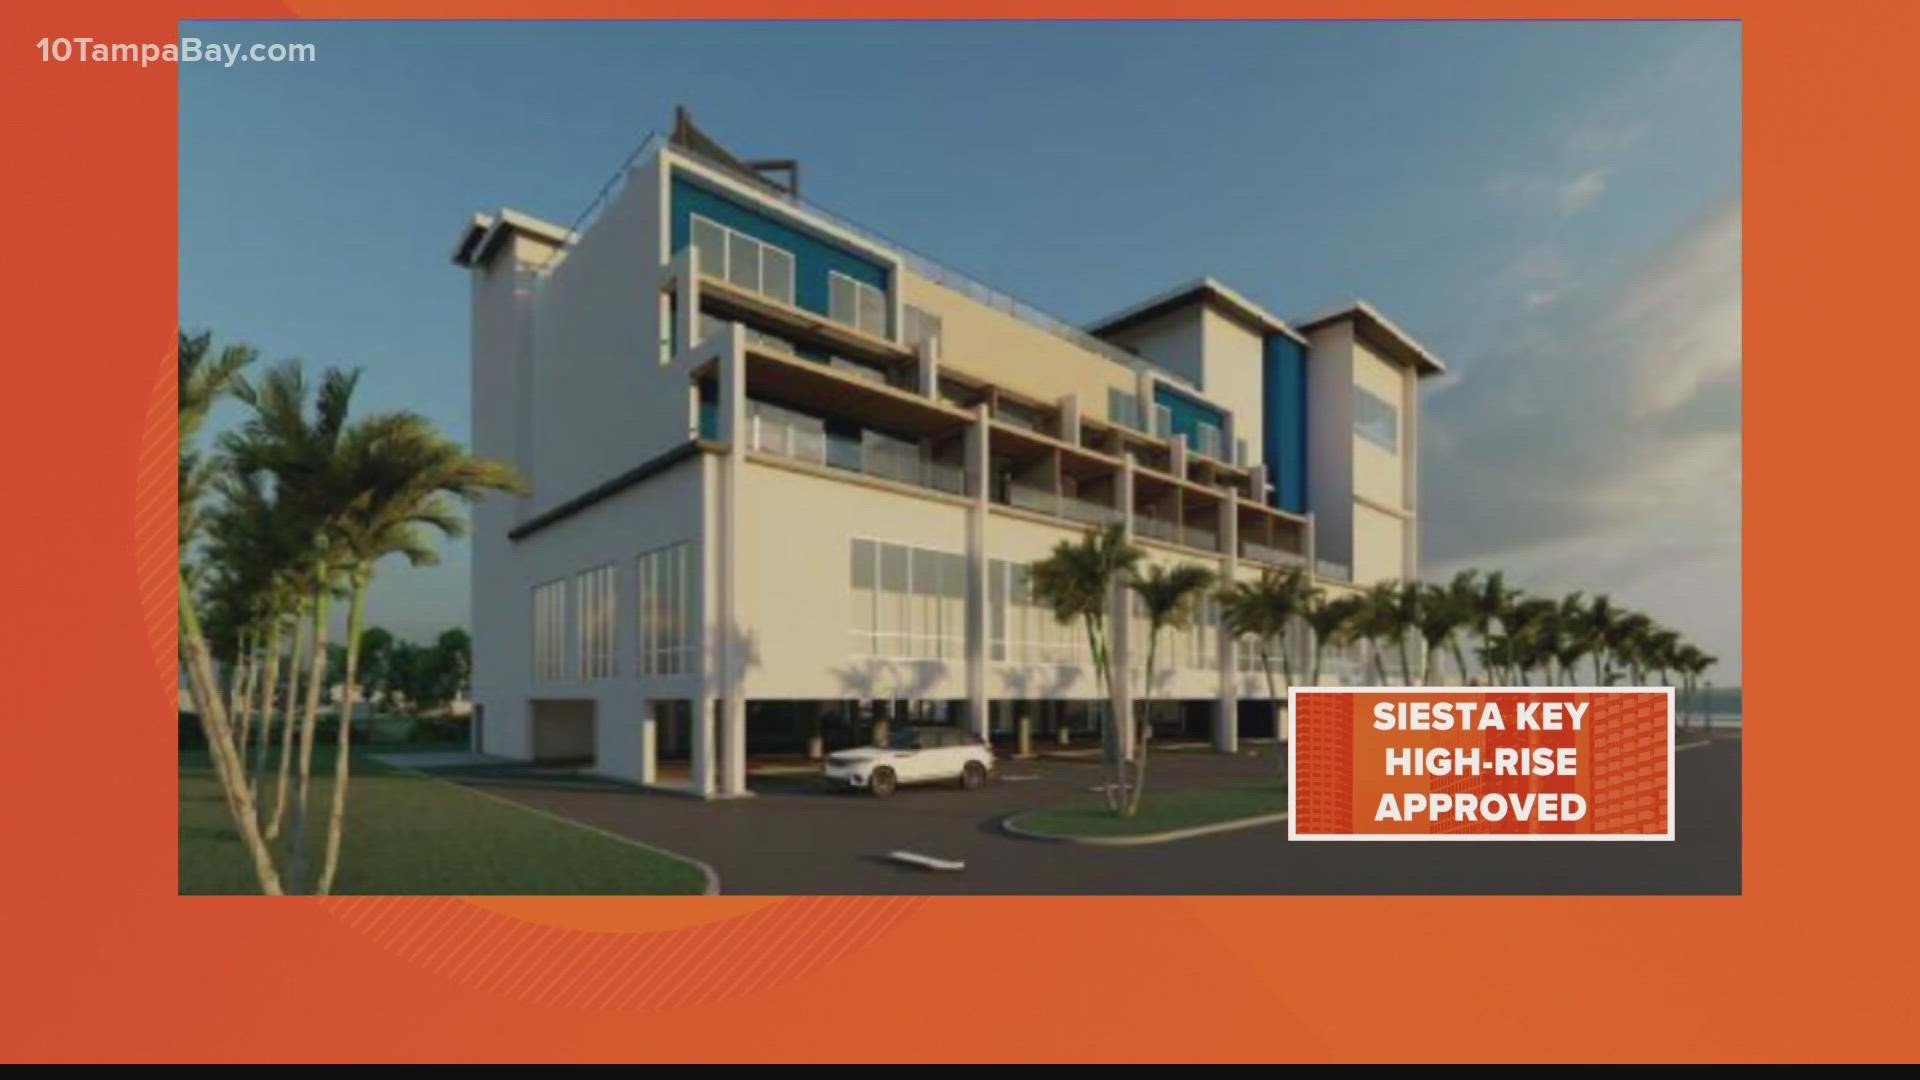 Commissioners gave a developer special approval as the hotel's plans exceeded the current zoning policies in the area.